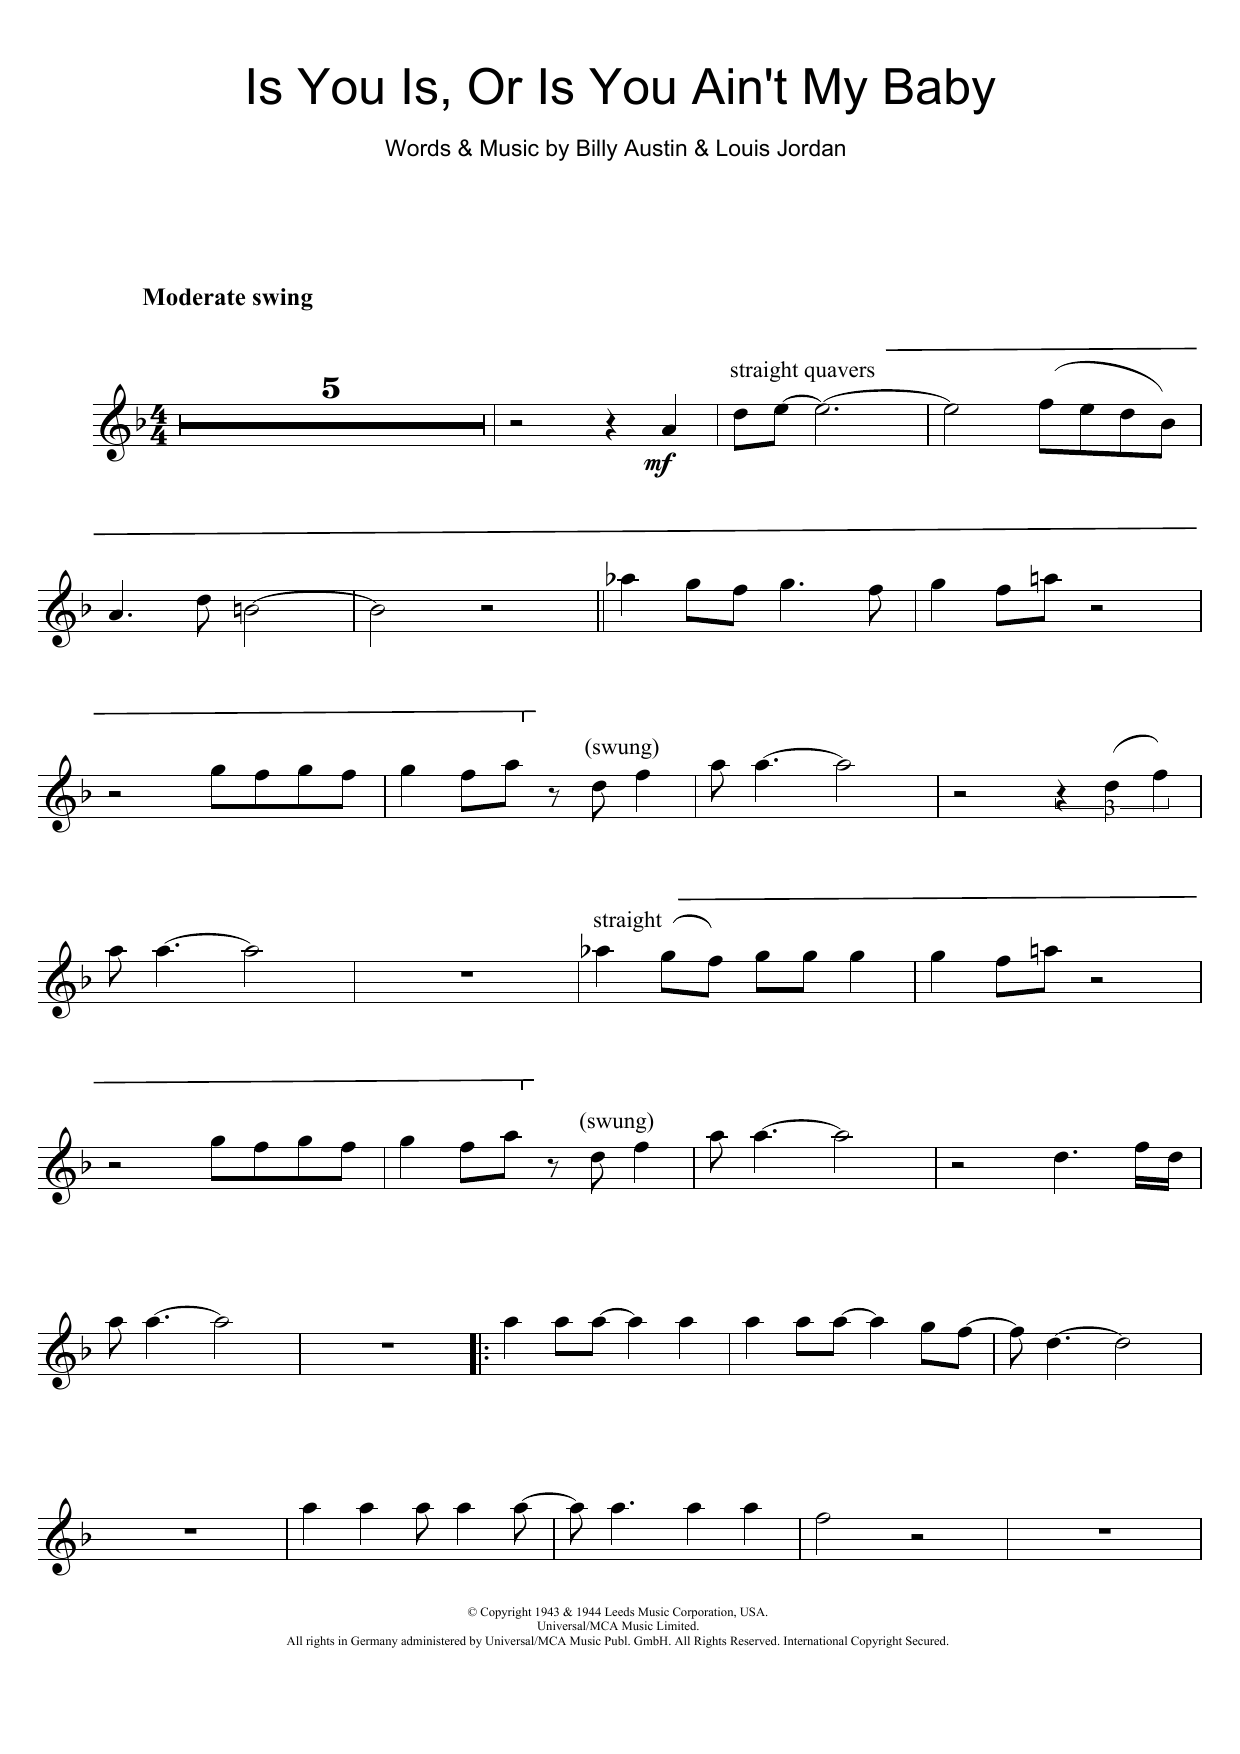 Download Diana Krall Is You Is Or Is You Ain't My Baby? Sheet Music